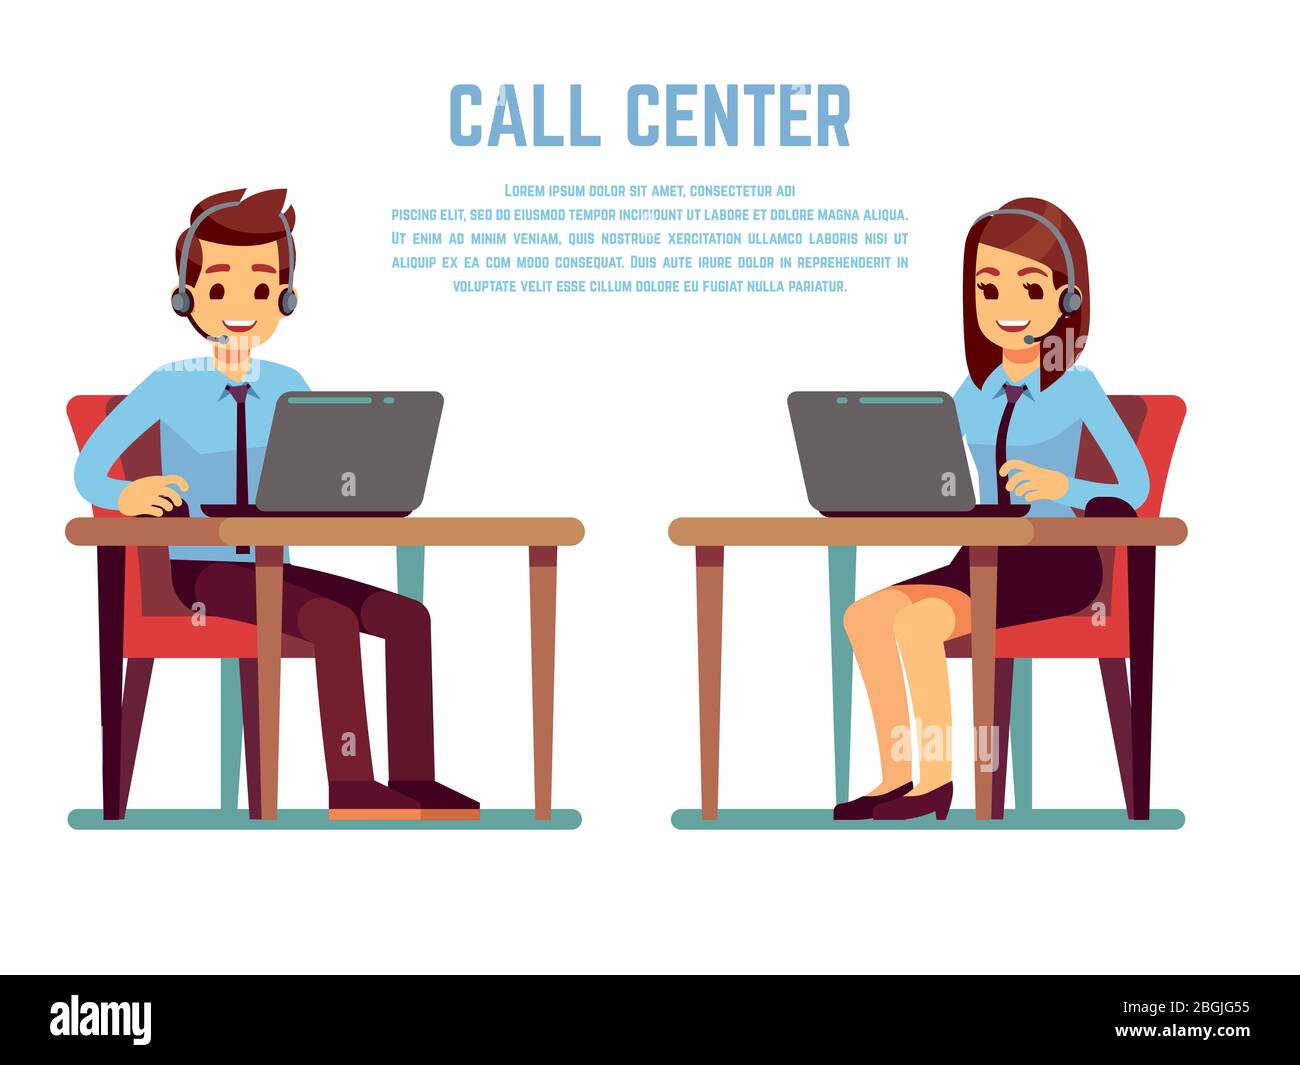 Smiling young woman and man operator with headset talking with customer. Cartoon characters for call center concept. Vector support service, online telephone consultant illustration Stock Vector